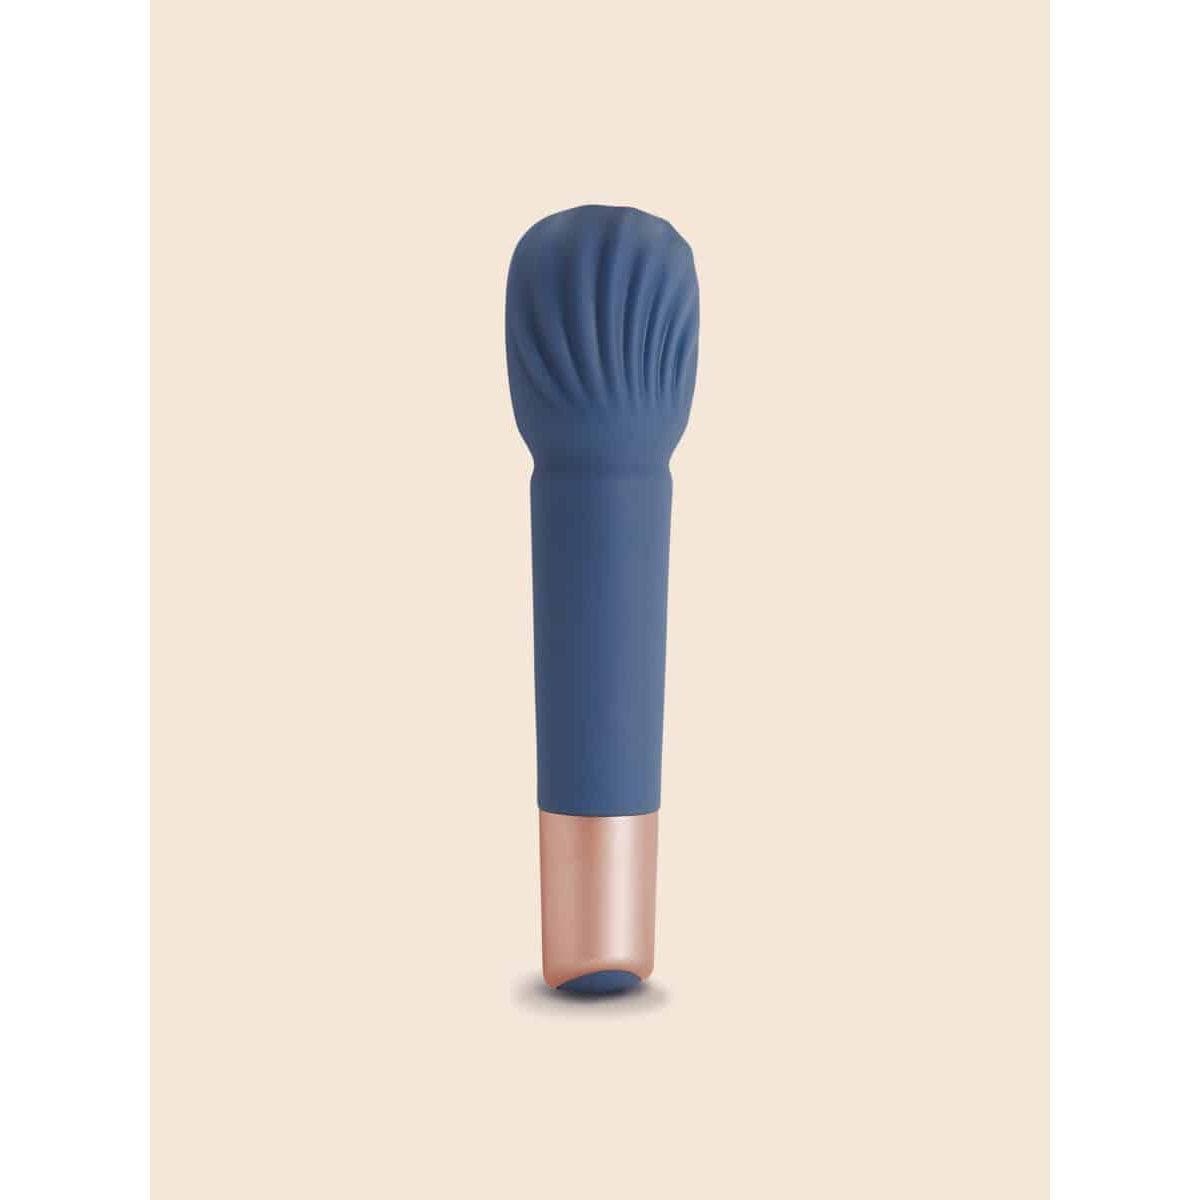 Deia The Wand Silicone 10 Vibration Wand Vibrator with Dual Density Head Blue - Romantic Blessings